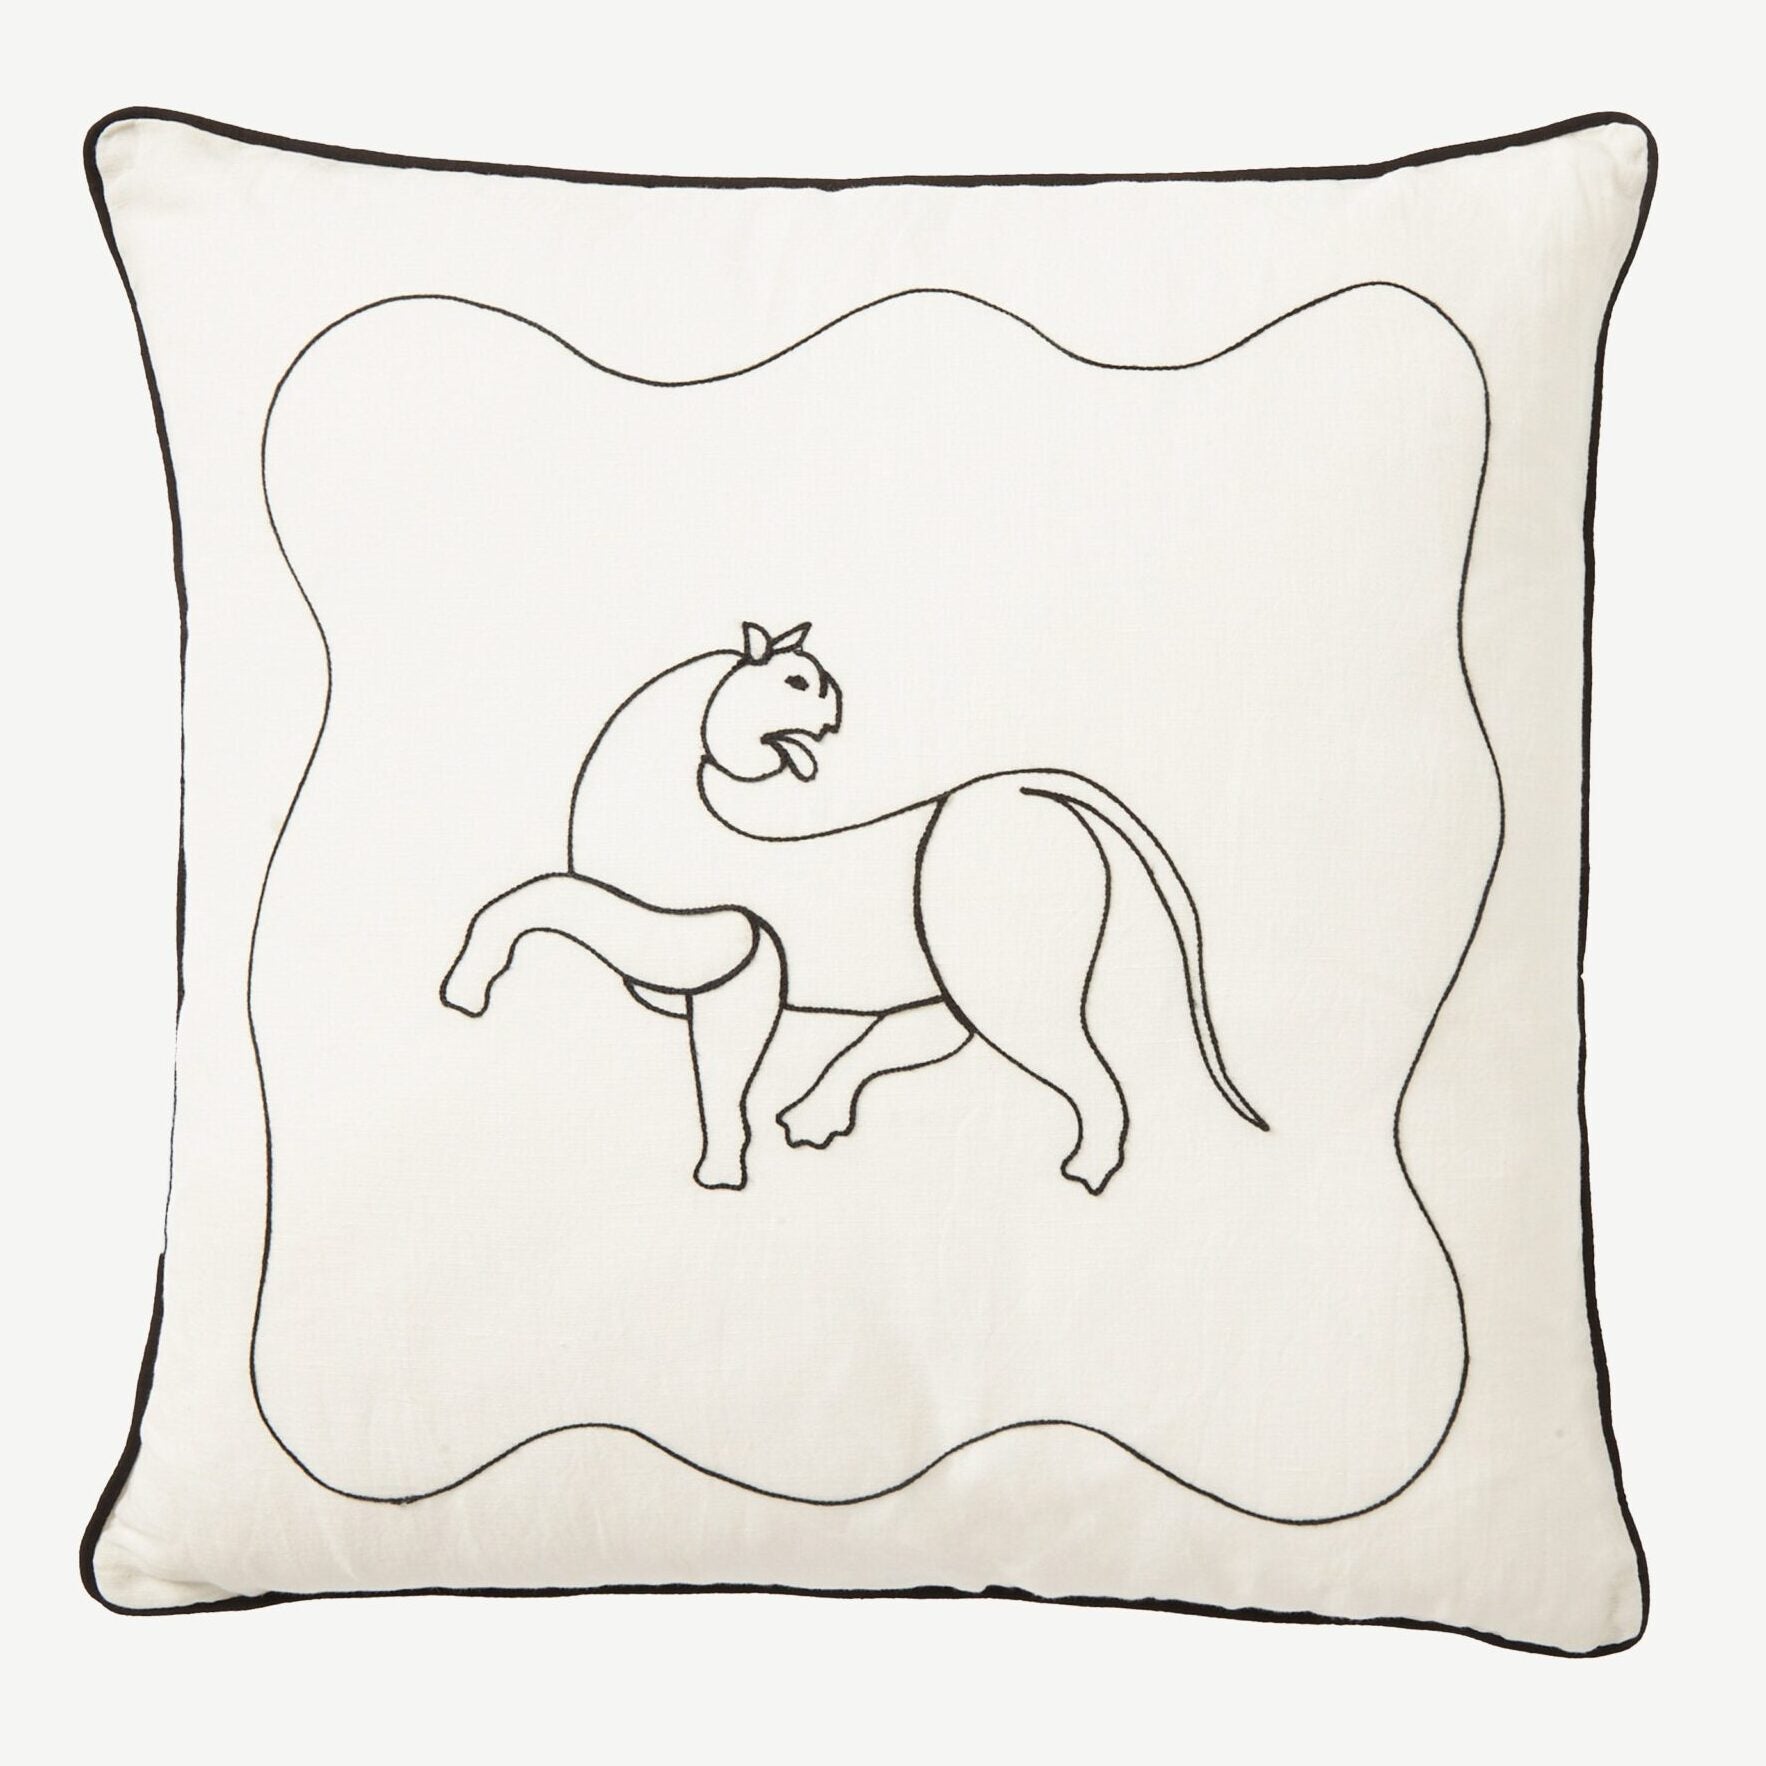 6 Cult-Favorite Fashion Brands That Make Equally Chic Pillows for Your Sofa